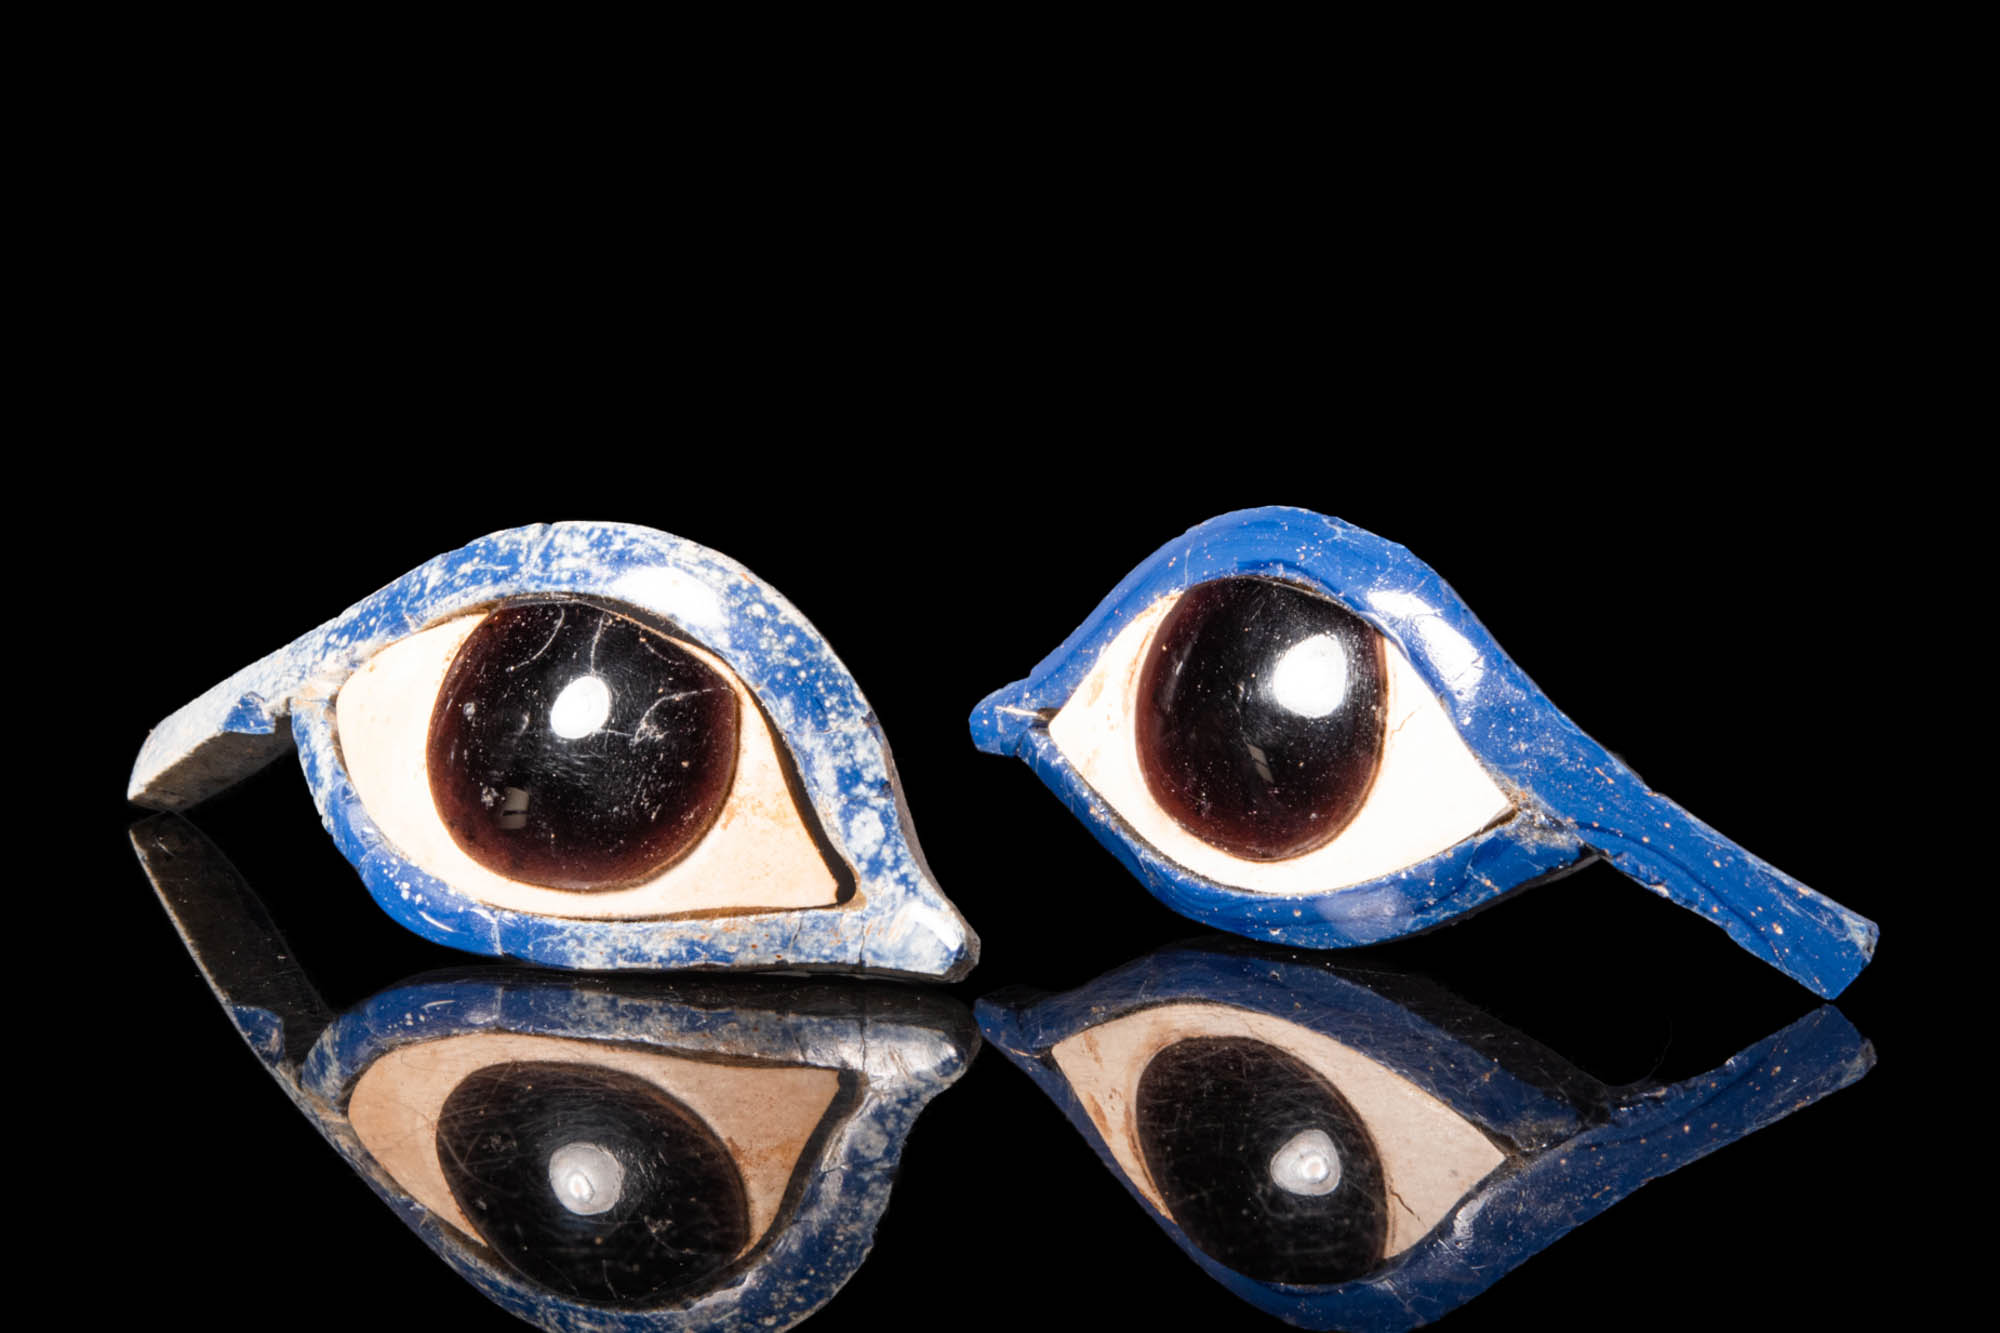 RARE EGYPTIAN GLASS AND OBSIDIAN EYES OF A MUMMY - Image 2 of 3